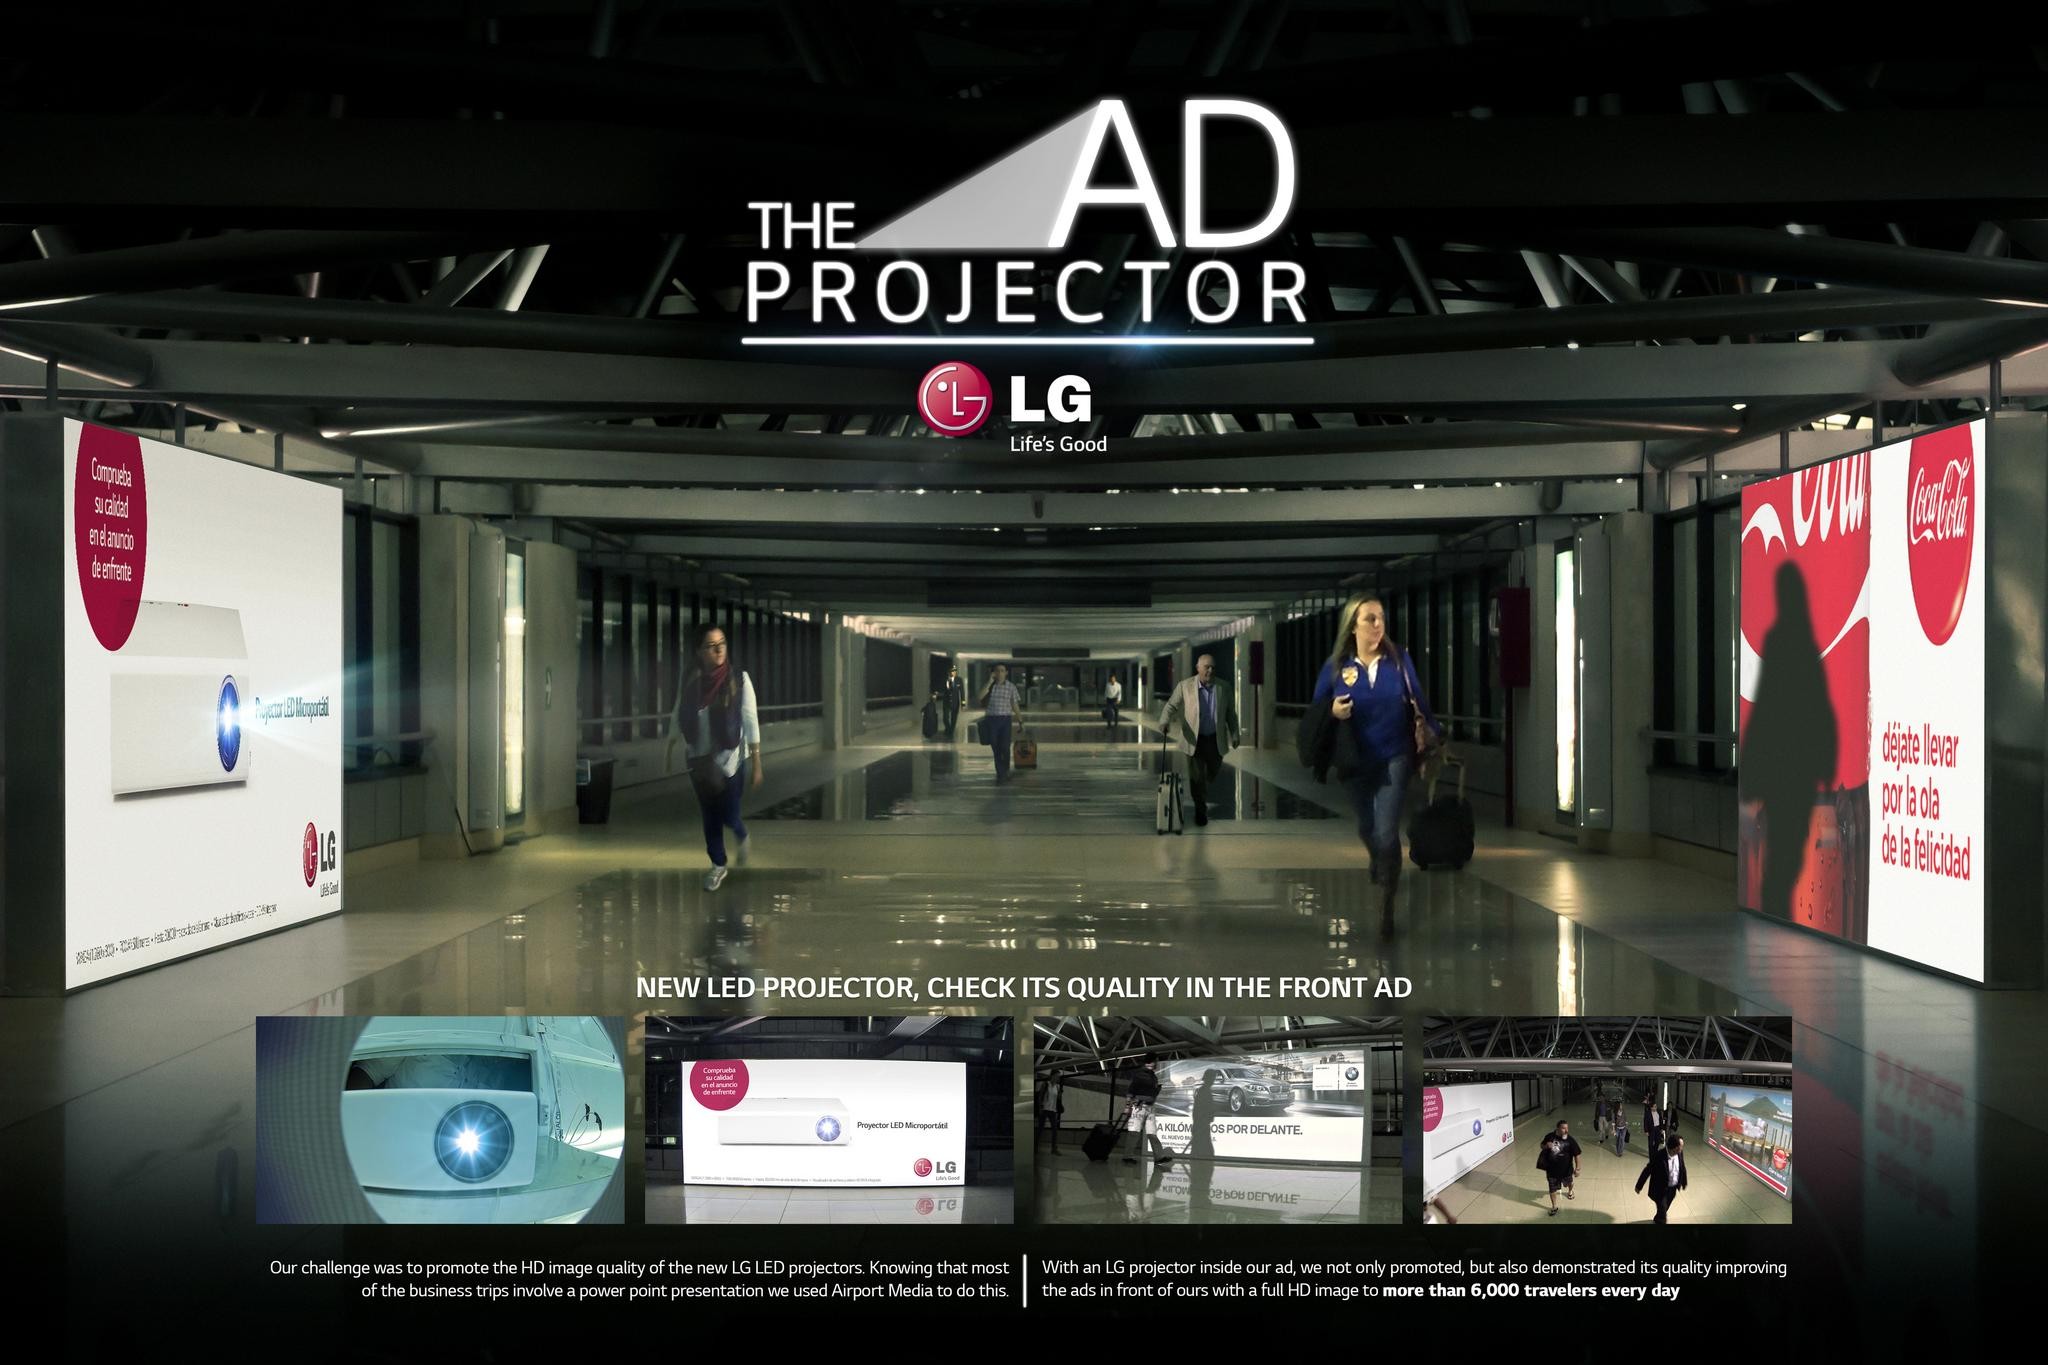 AD PROJECTOR